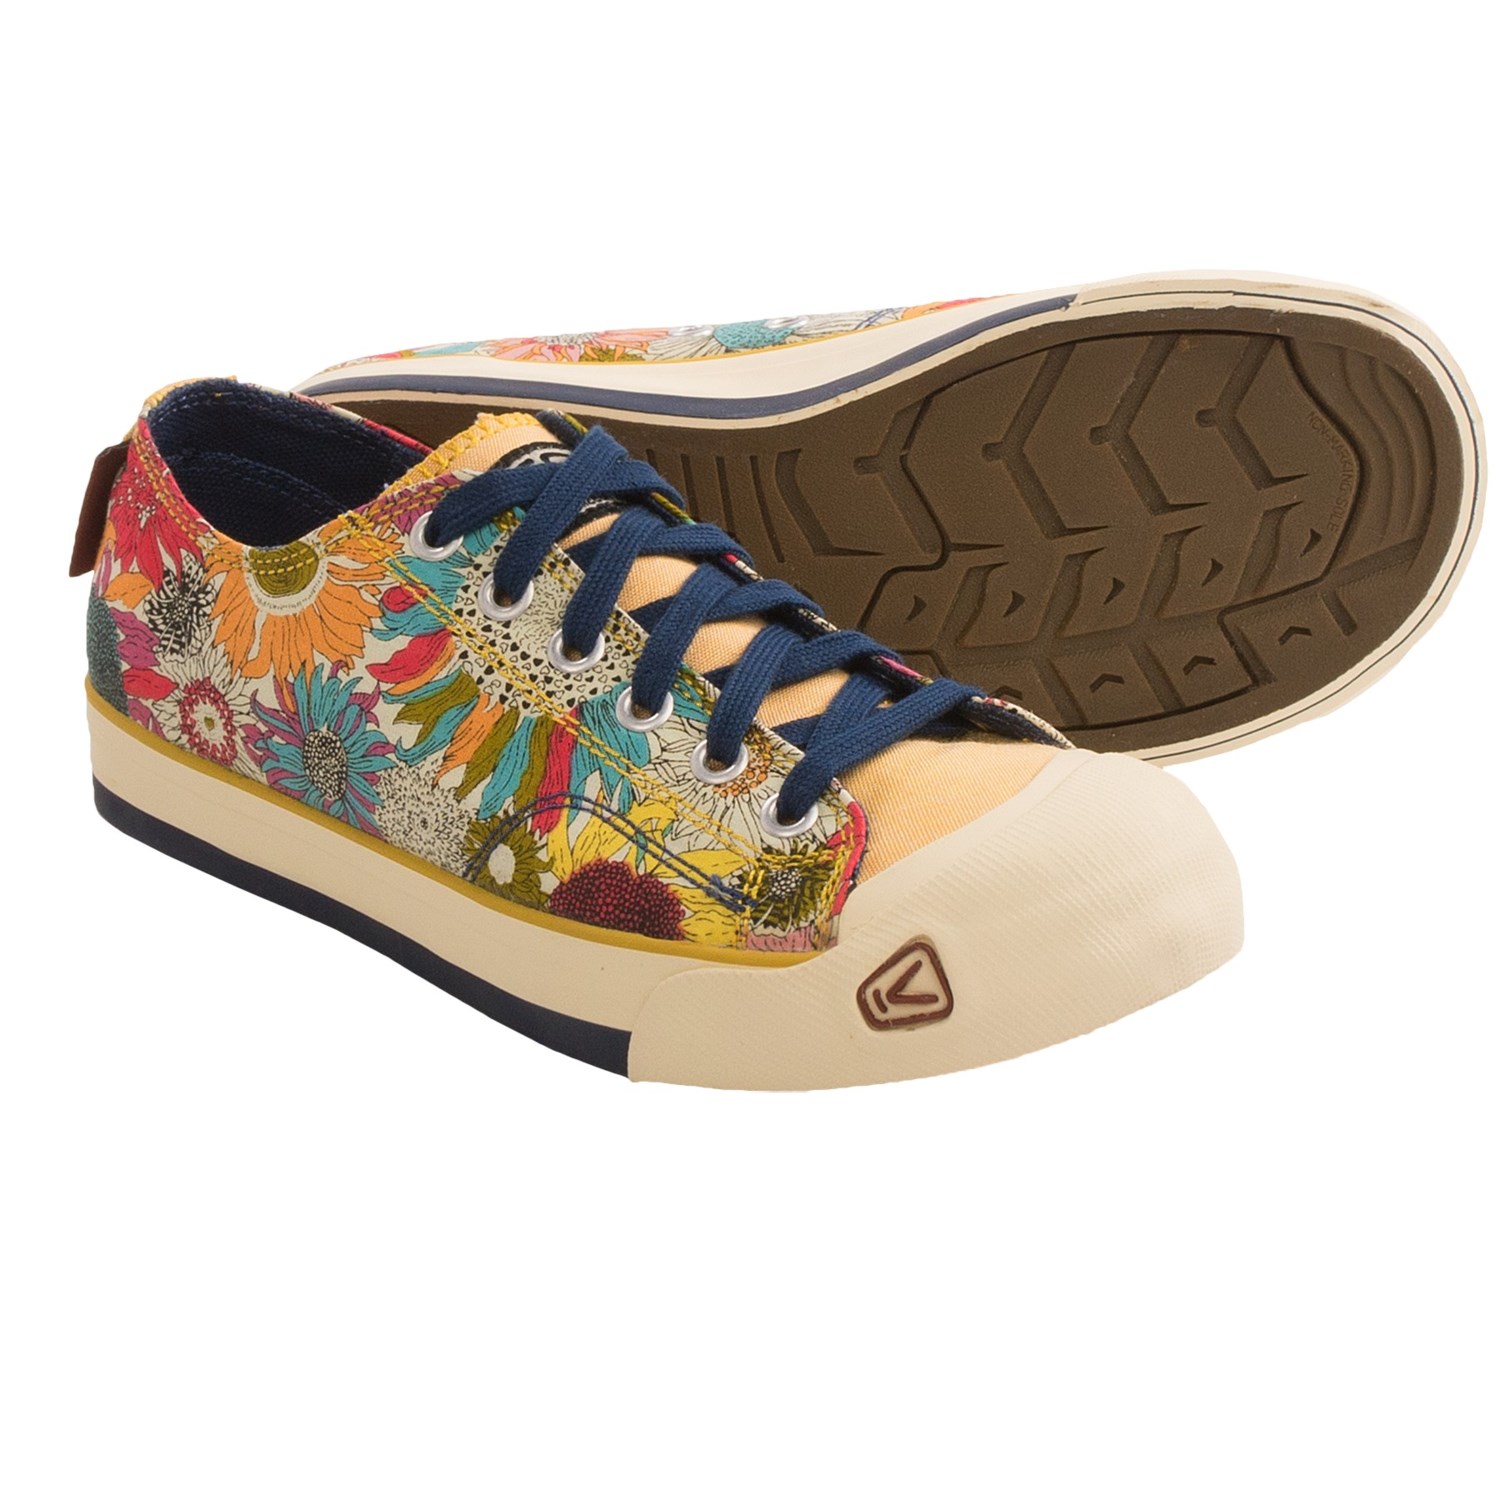 Keen Landcaster Lace Sneakers (For Women) in Golden YellowEnsign Blue